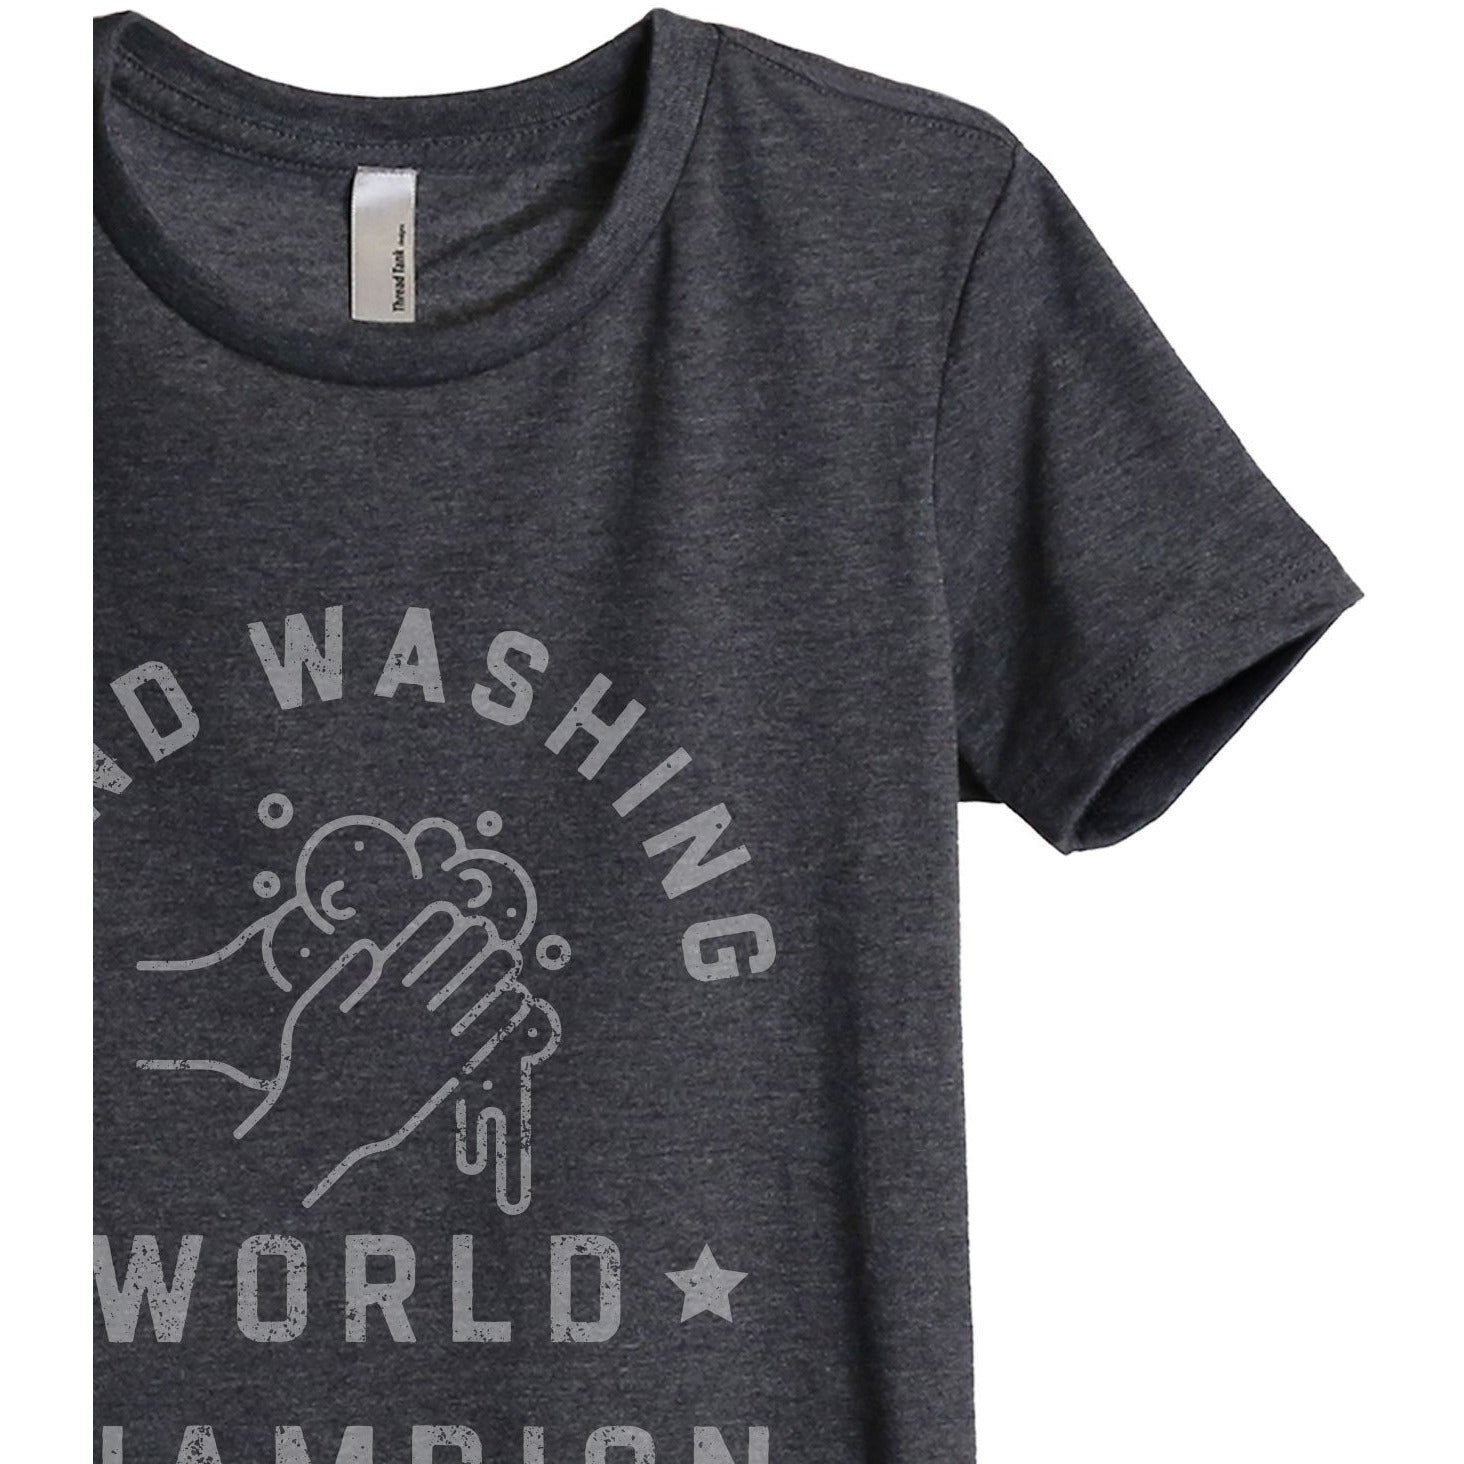 Hand Washing World Champion Women's Relaxed Crewneck T-Shirt Top Tee Charcoal Grey Zoom Details